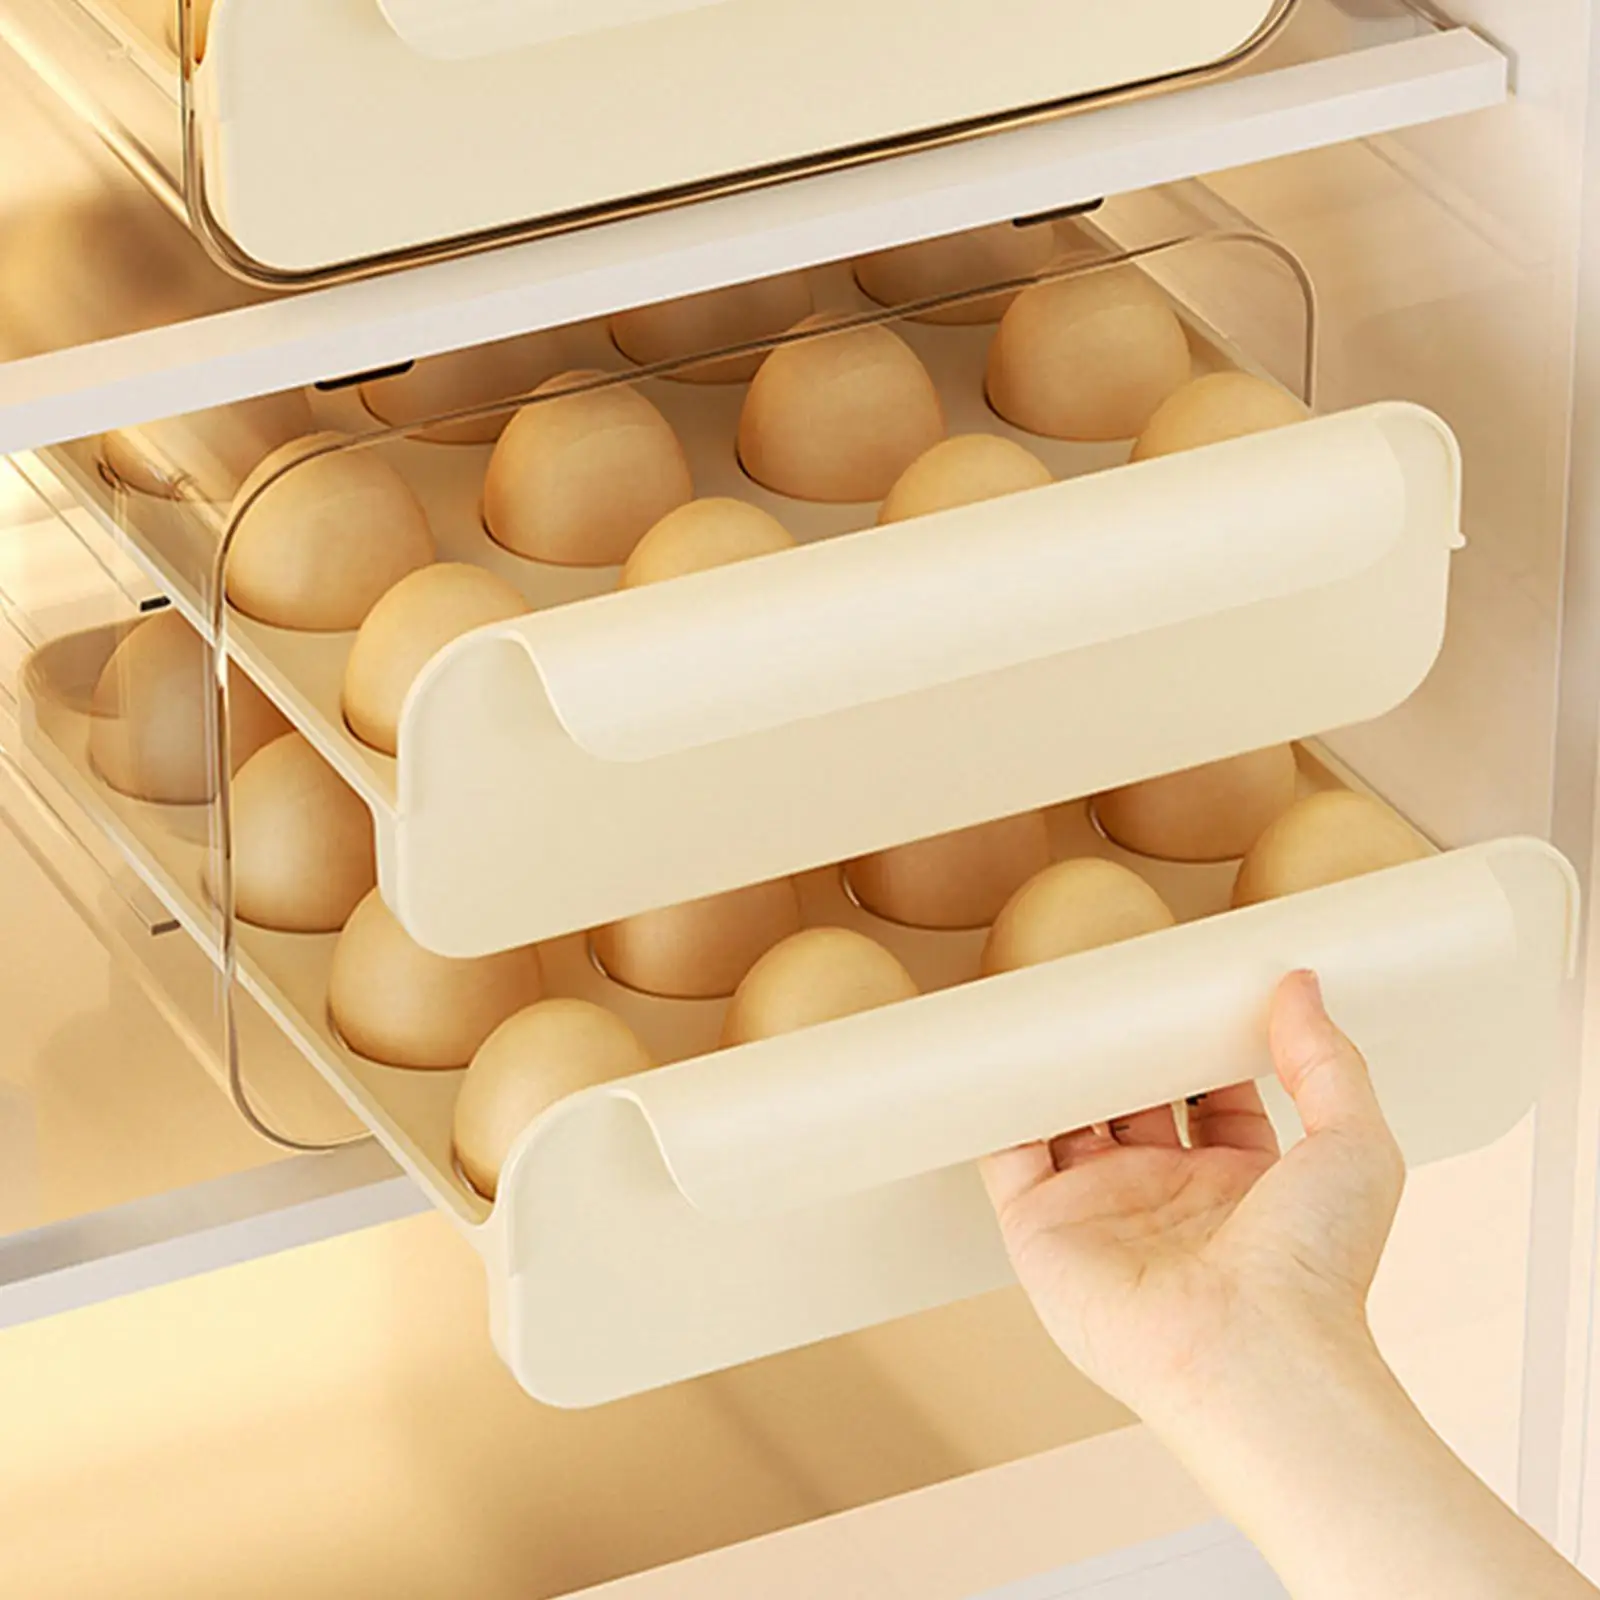 Eggs Container Holds 32 Eggs Large Capacity Refrigerator Egg Organizer for Cabinet Countertop Refrigerator Kitchen Cupboard